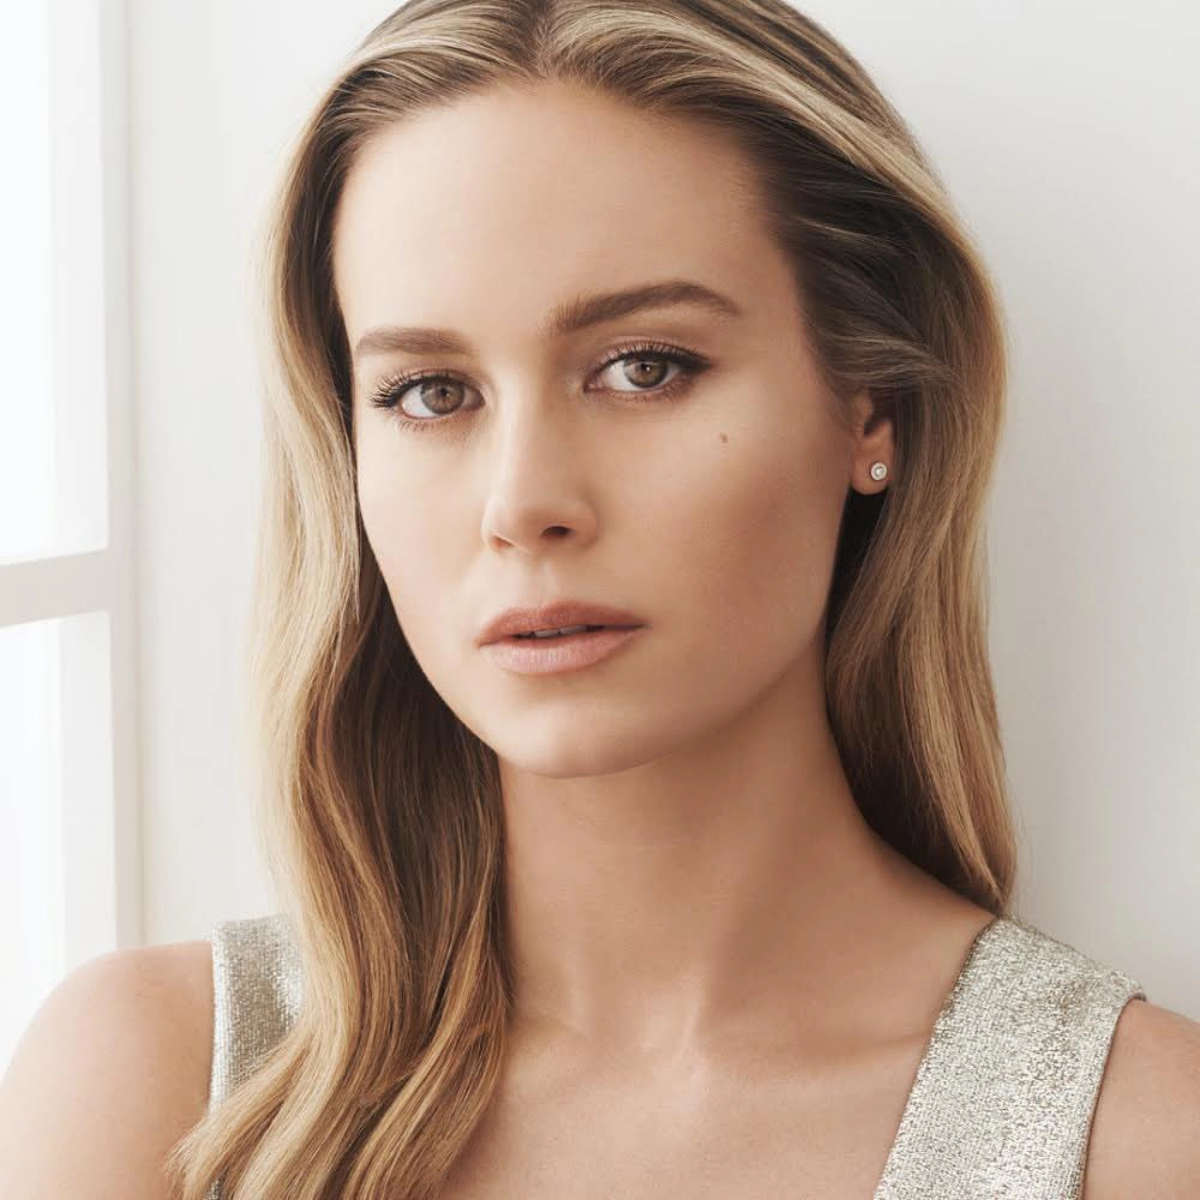 Brie Larson Biography, Wiki, Family, Age, Height, Net Worth